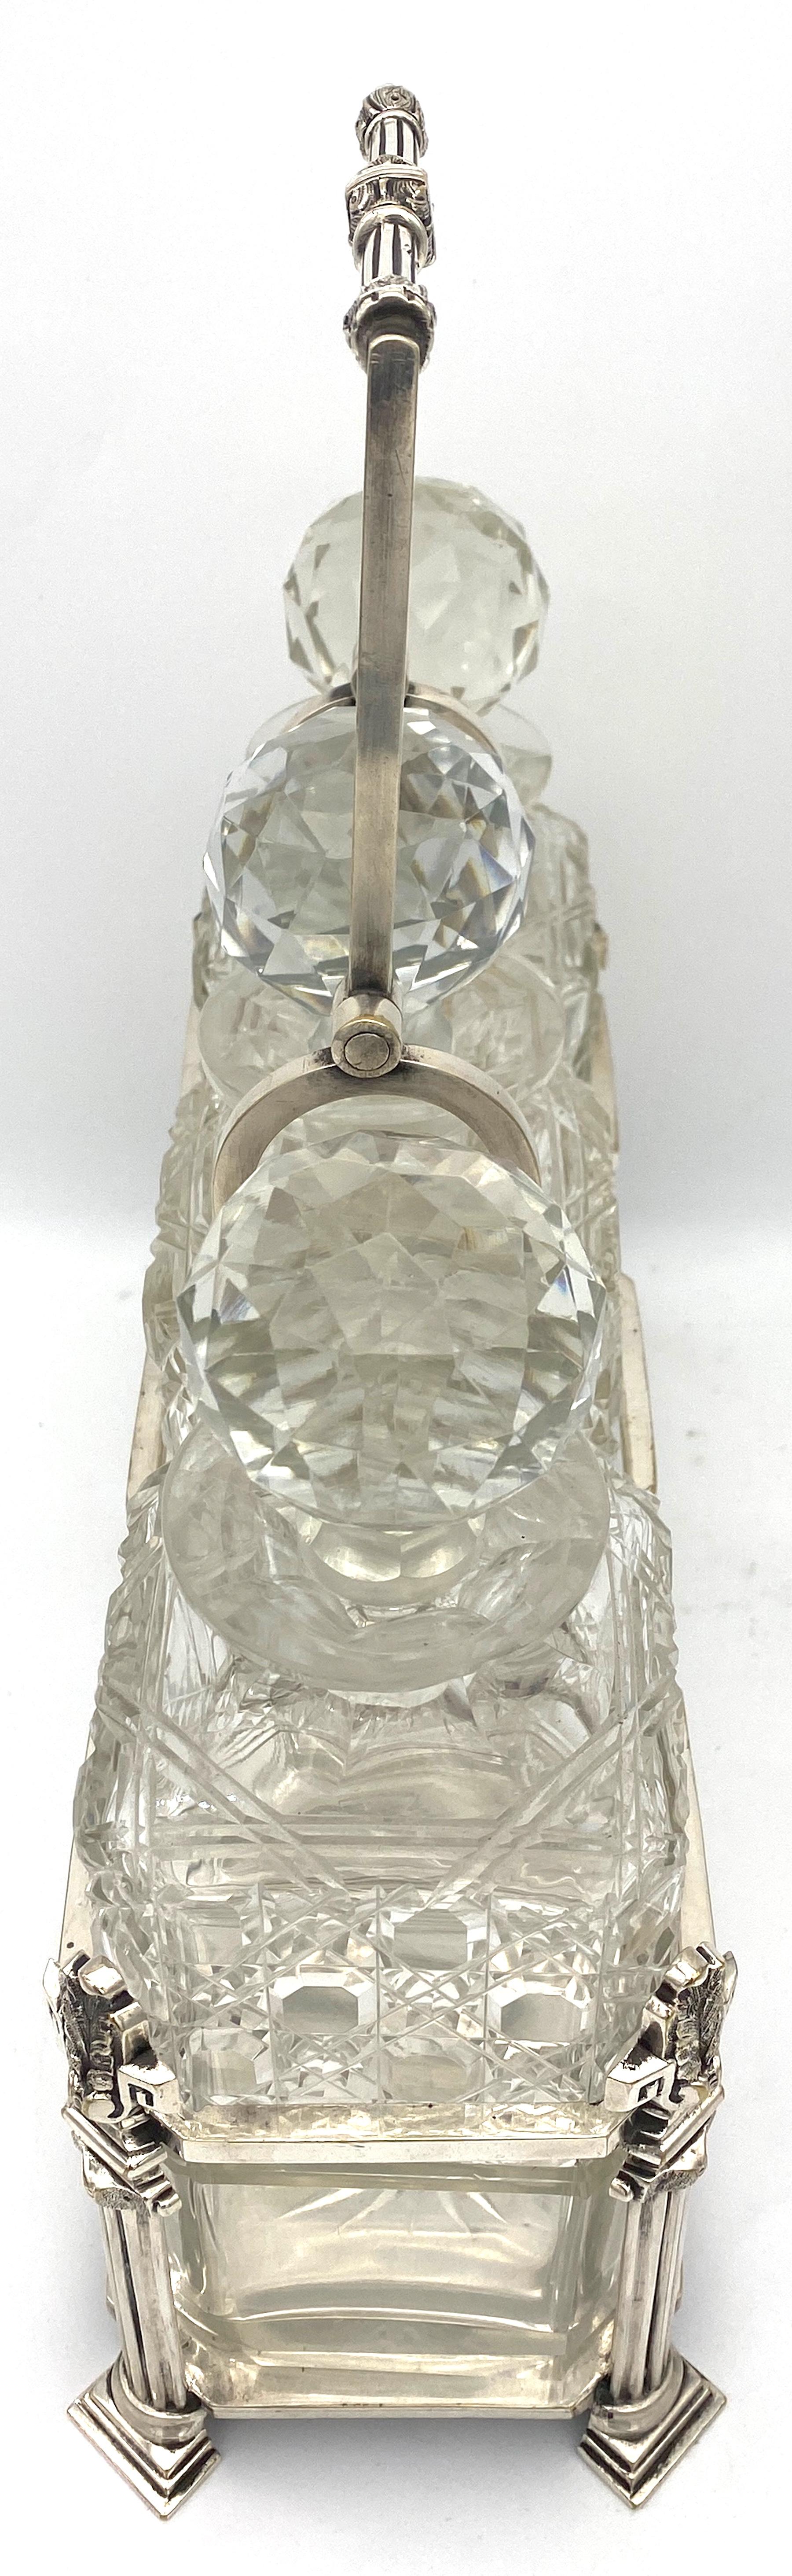 Antique English Silverplated Neoclassical Three Cut Glass Decanter/ Tauntless   In Good Condition For Sale In West Palm Beach, FL